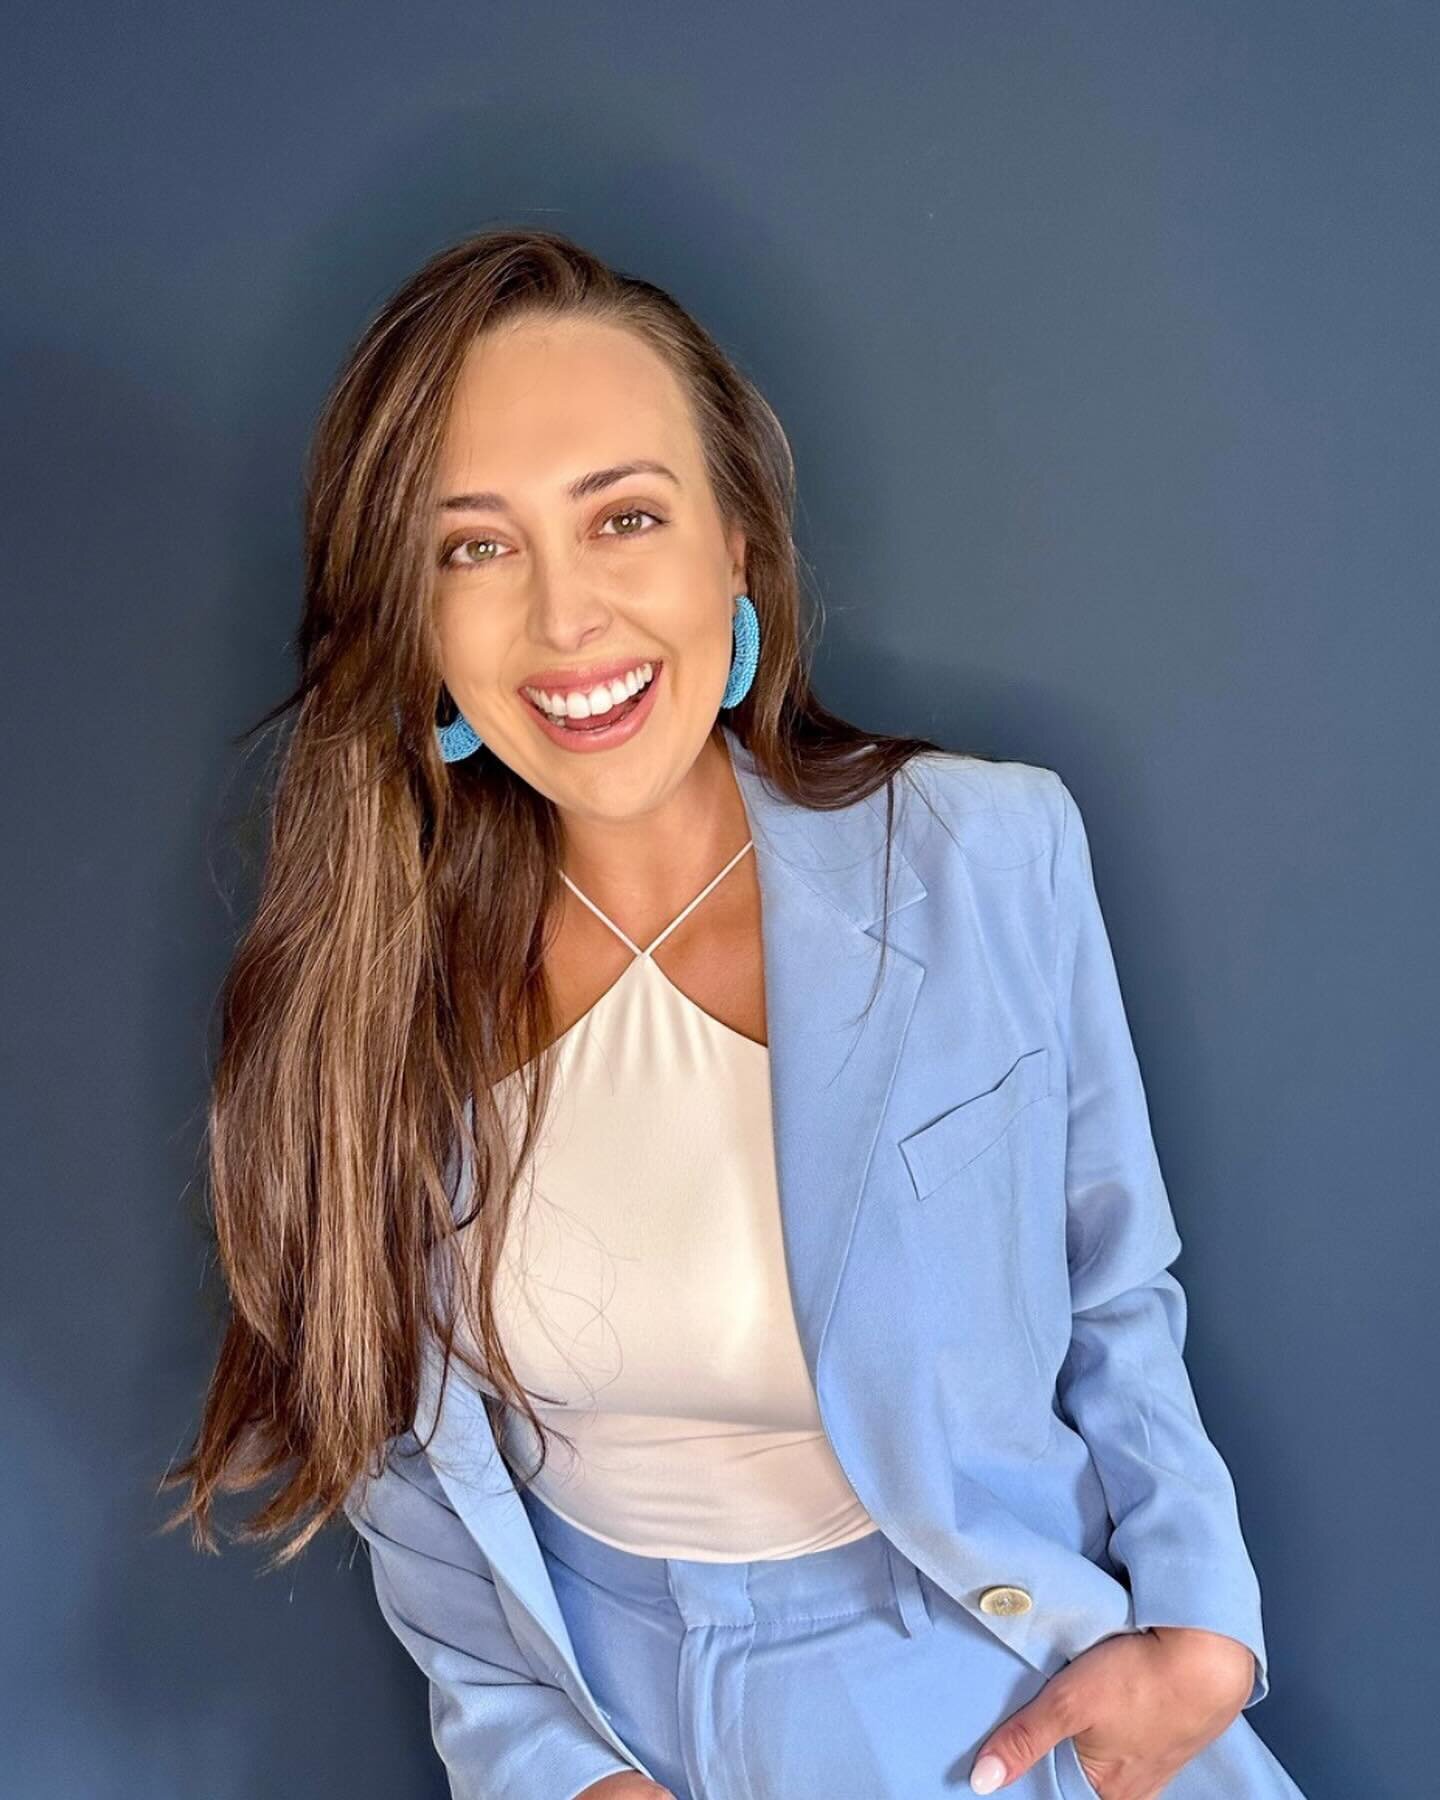 Emma is a leading career confidence and clarity coach for powerhouse women. &nbsp;A certified coach, NLP master practitioner, ICF member, with a degree in global business and marketing.&nbsp;

Emma specialises in clarity for your next career move; th